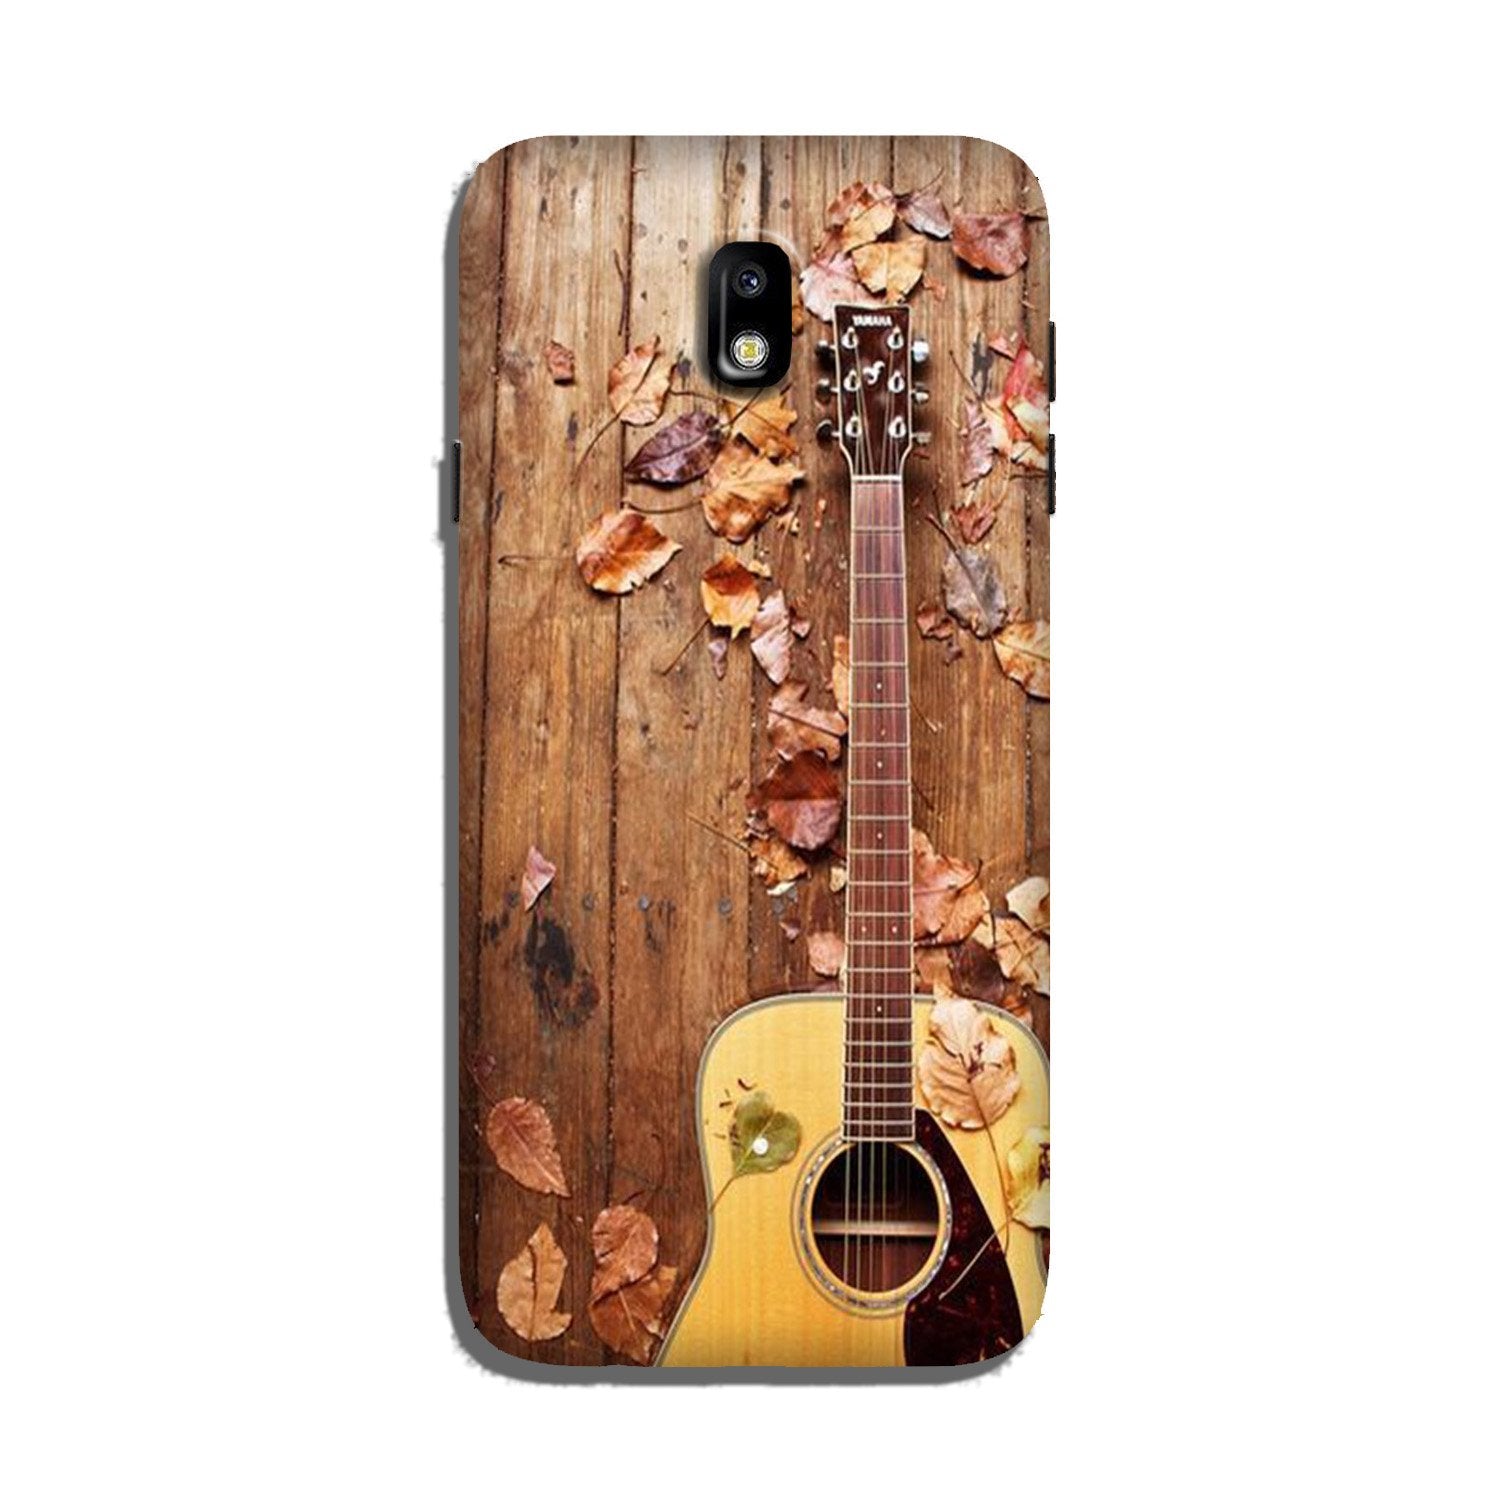 Guitar Case for Galaxy J3 Pro